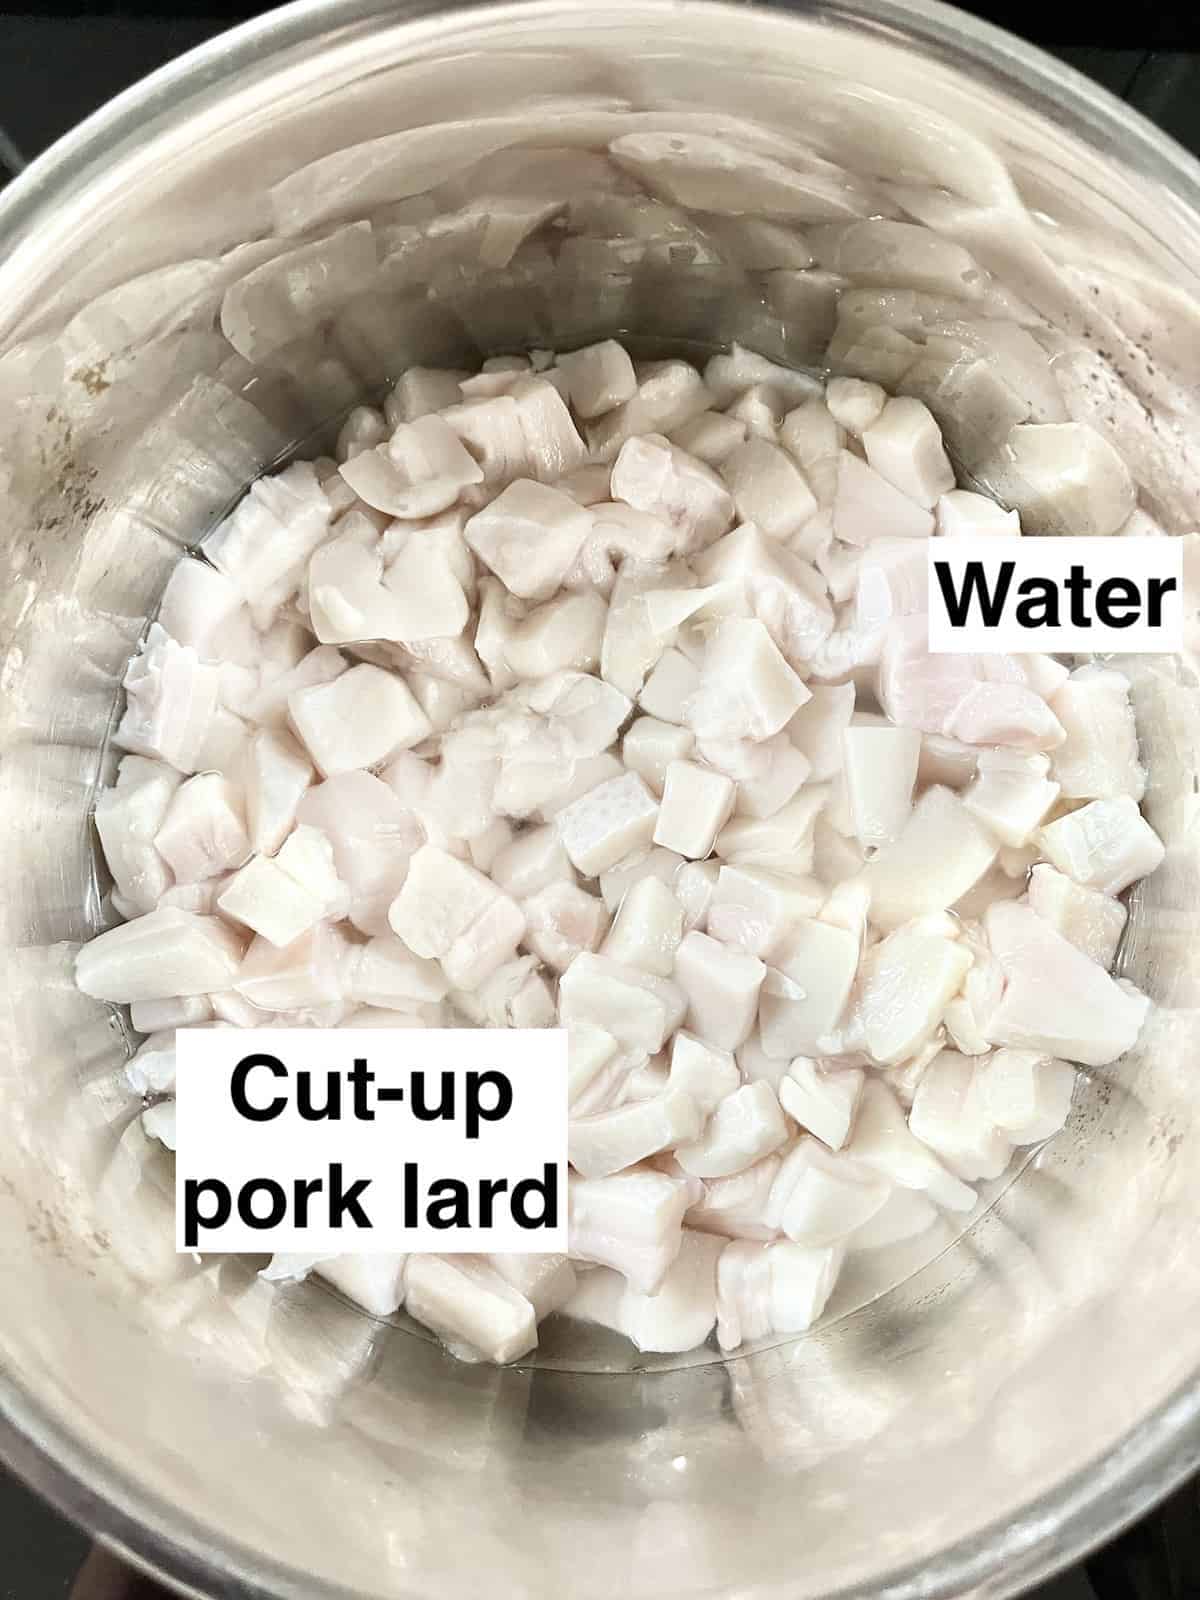 A pot of pork lard cut into small pieces and a bit of water.